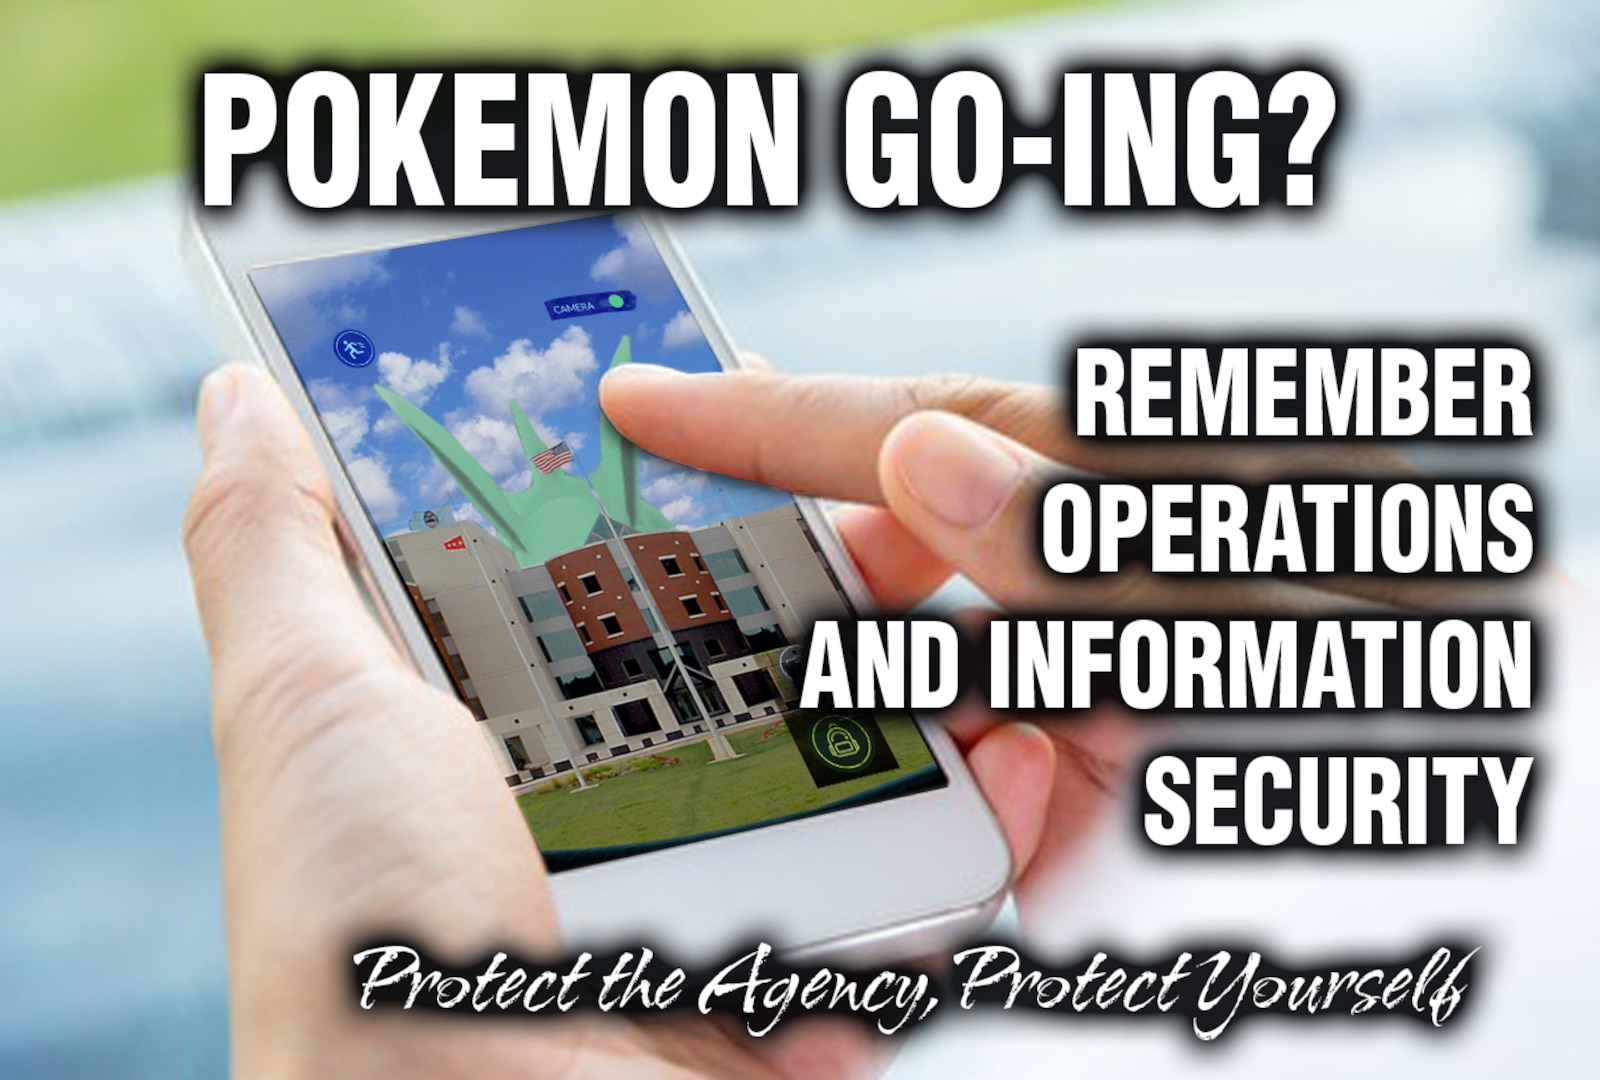 A few simple steps can help you avoid the privacy and security risks that can accompany playing Pokemon Go.